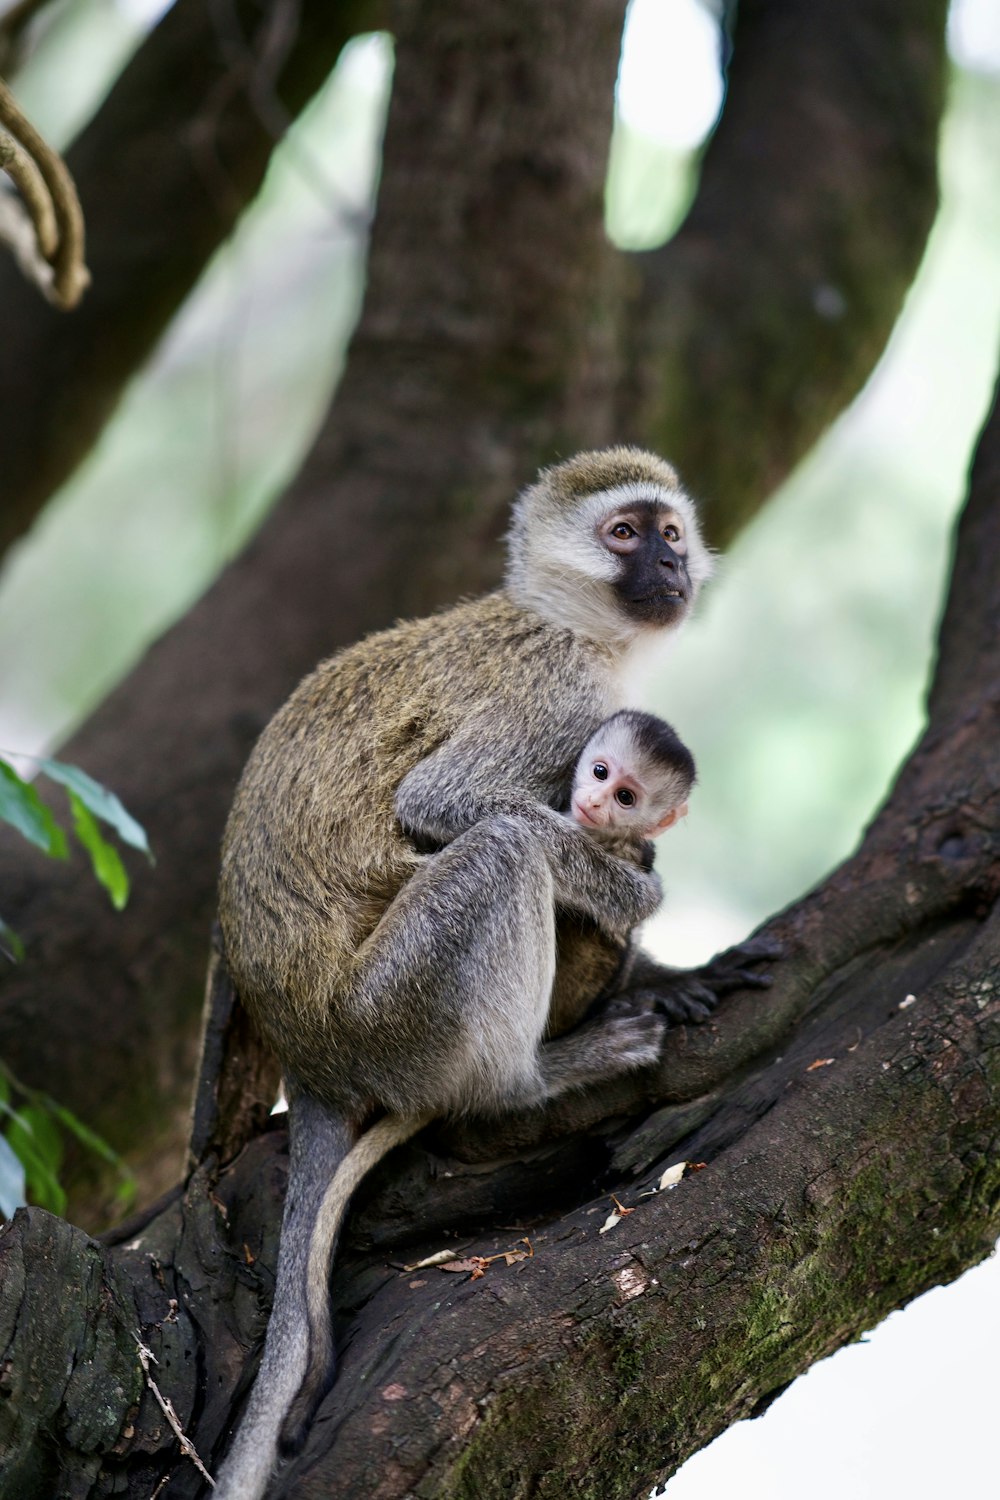 two monkeys on tree branch during daytime